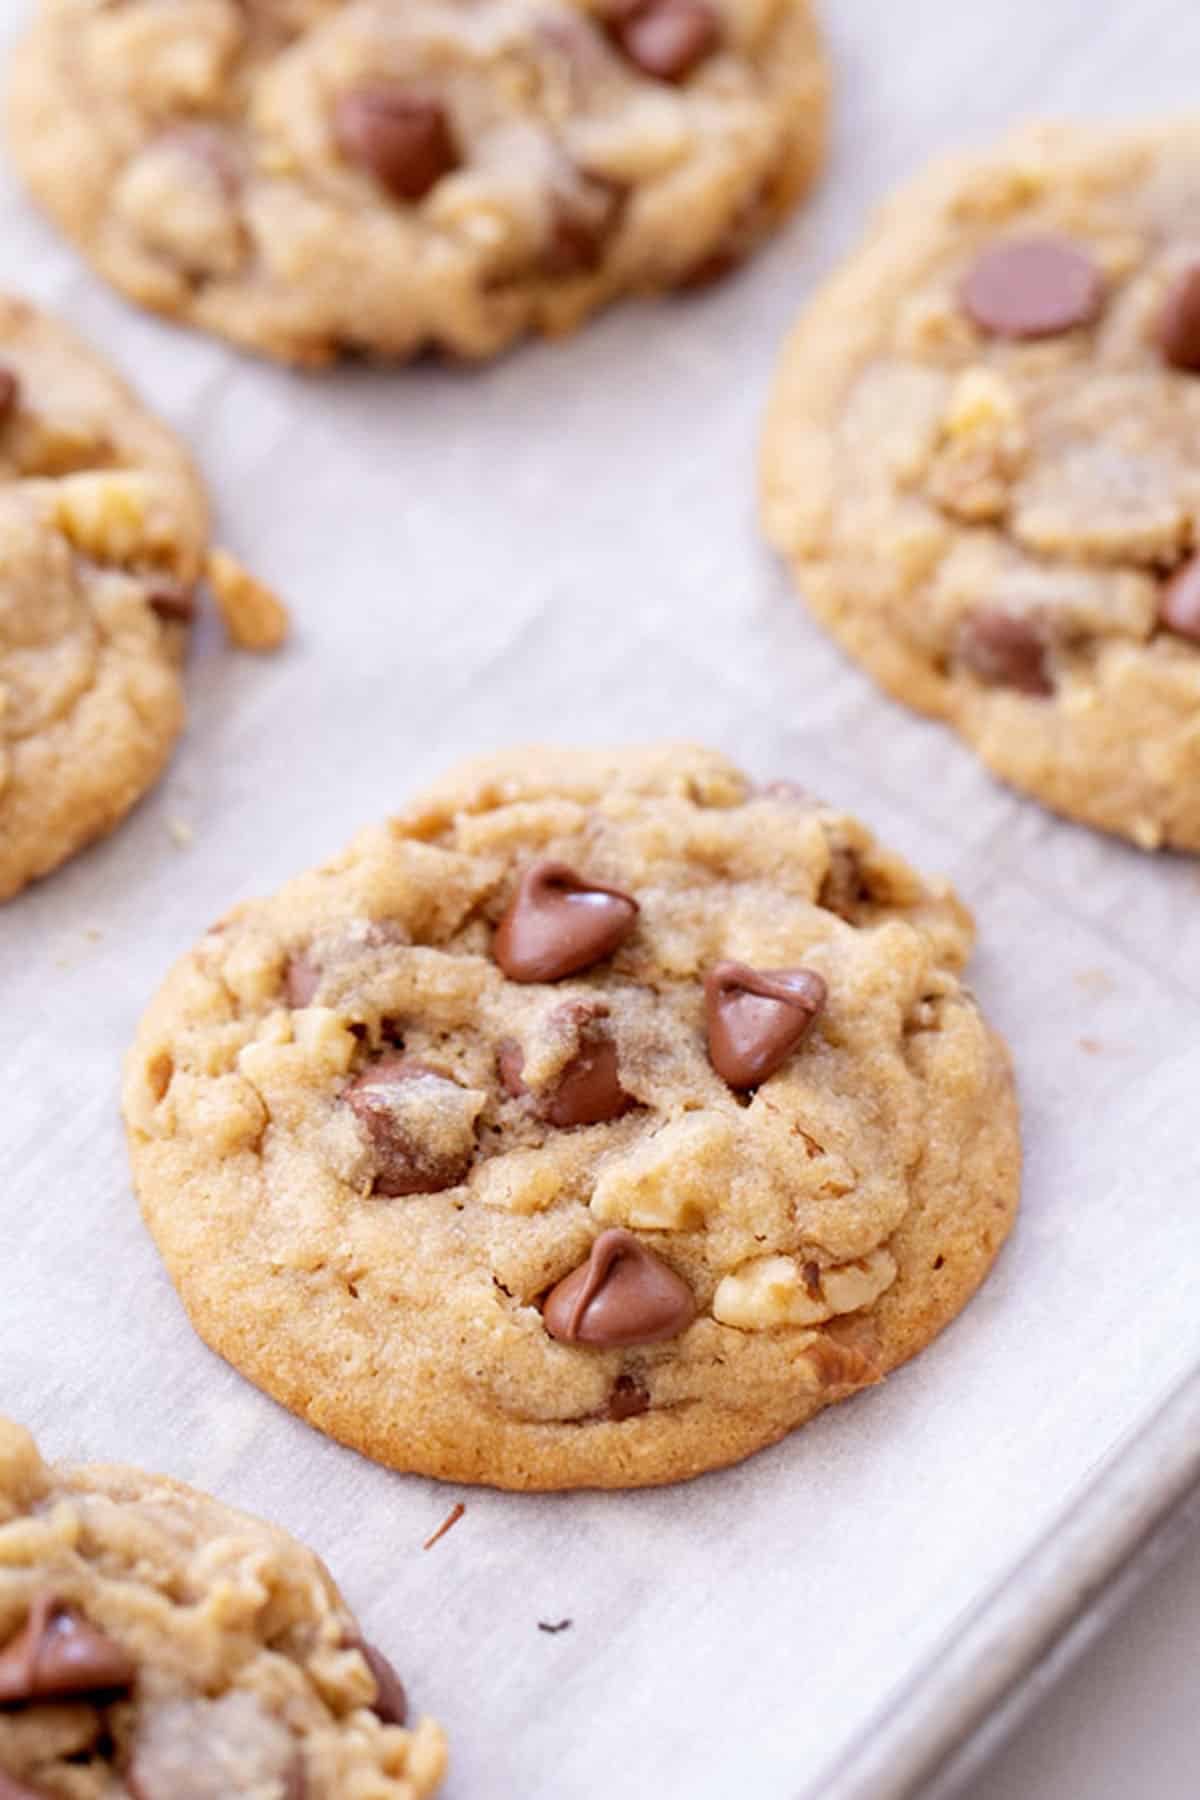 doubletree chocolate chip cookies copycat recipe, this recipe for doubletree chocolate chip cookies was just recently released.